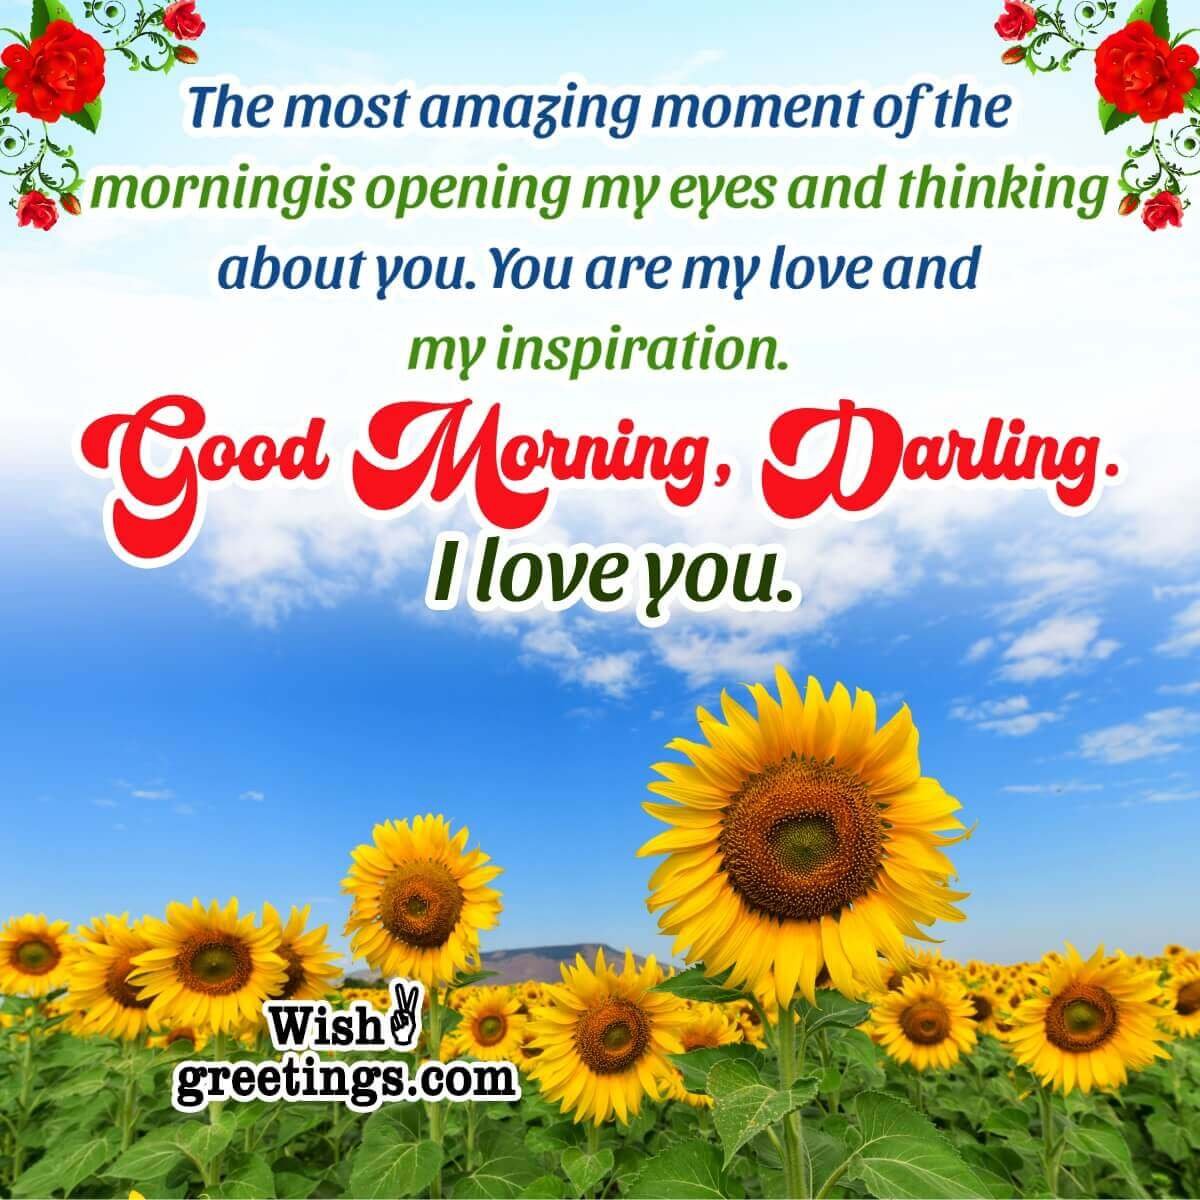 Good Morning Darling, Greeting Picture